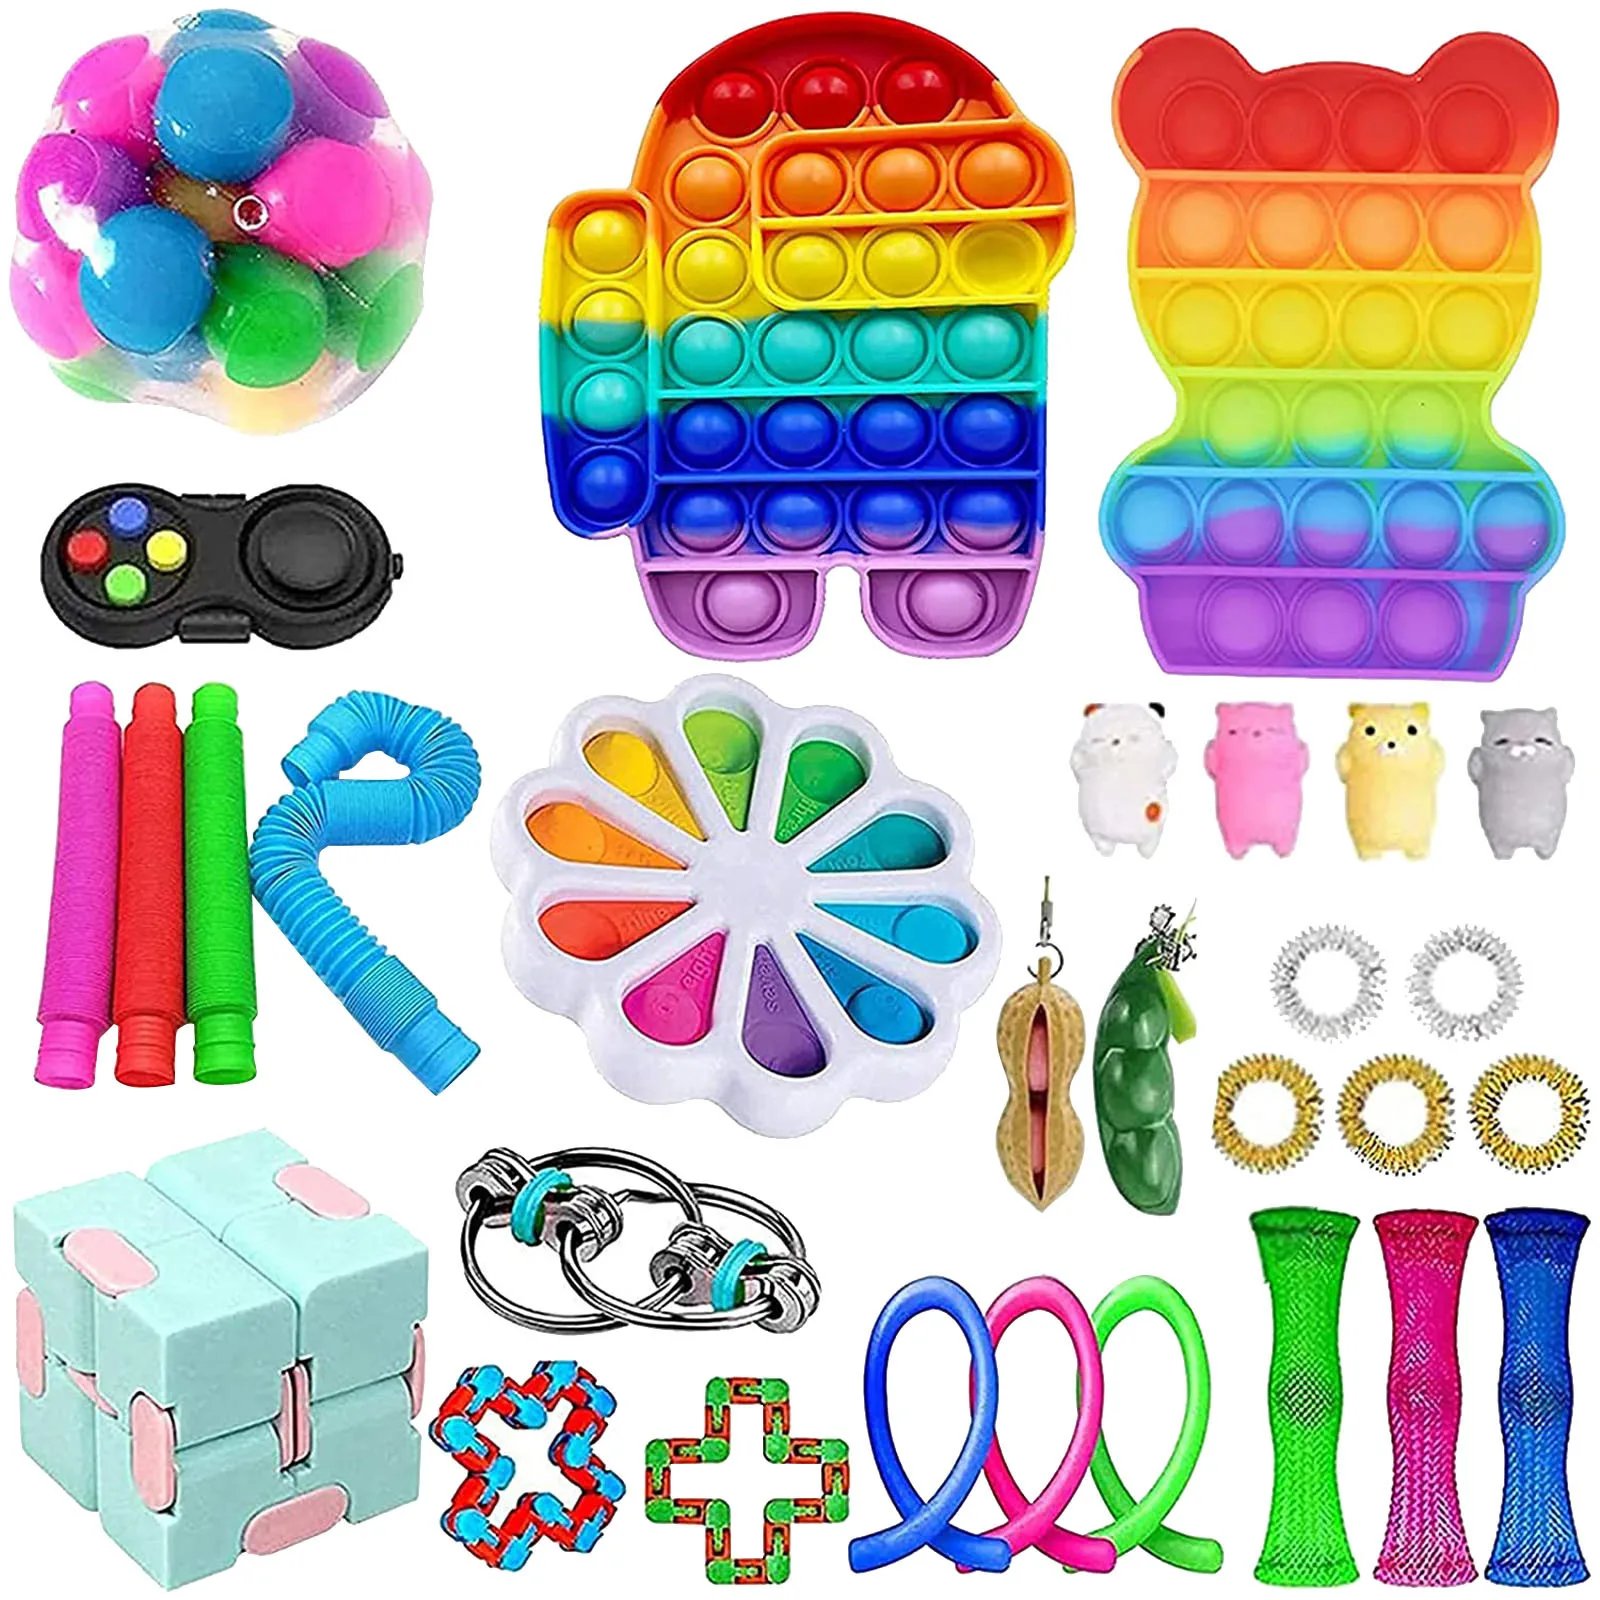 

Fidget Toys Anti Stress Set Stretchy Strings Squeeze Toys Gift Pack Adults Children Squishy Sensory Antistress Figet Toys